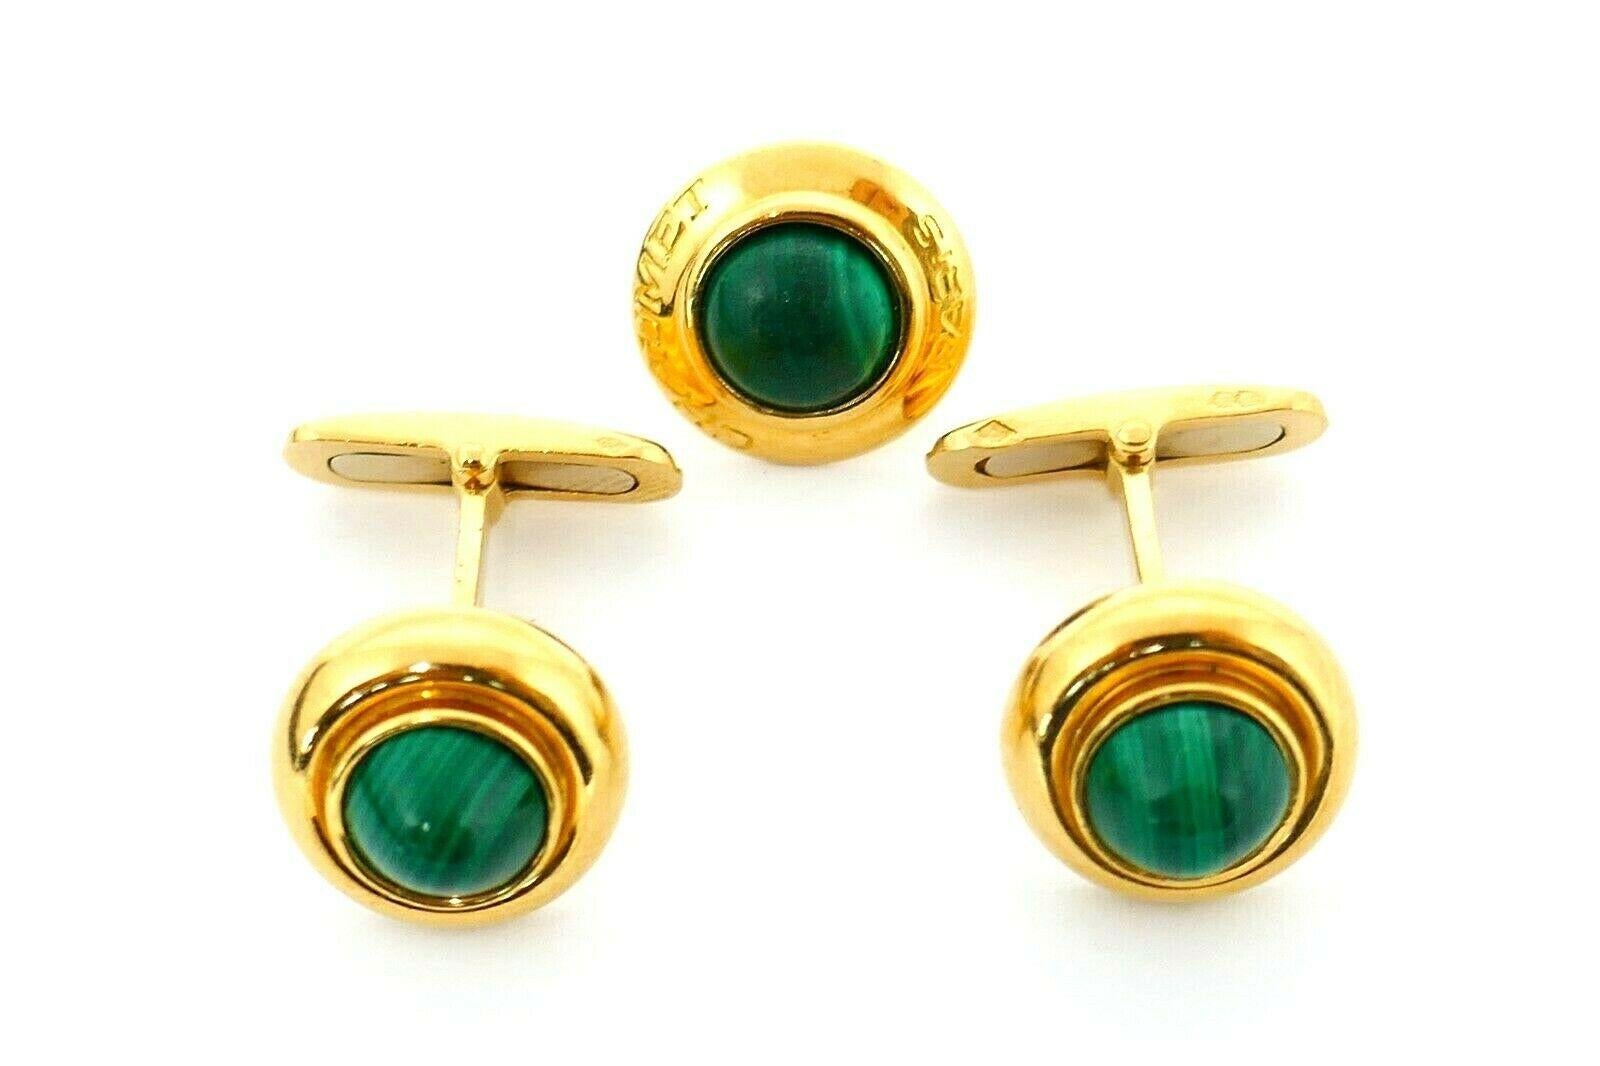 A beautiful set of cufflinks and a tie tack from Chaumet (Paris). Made of 18k yellow gold and malachite. Stamped with the Chaumet maker's mark, a hallmark for 18k gold and a serial number. The tie tack has a Chaumet Paris engraving on the front